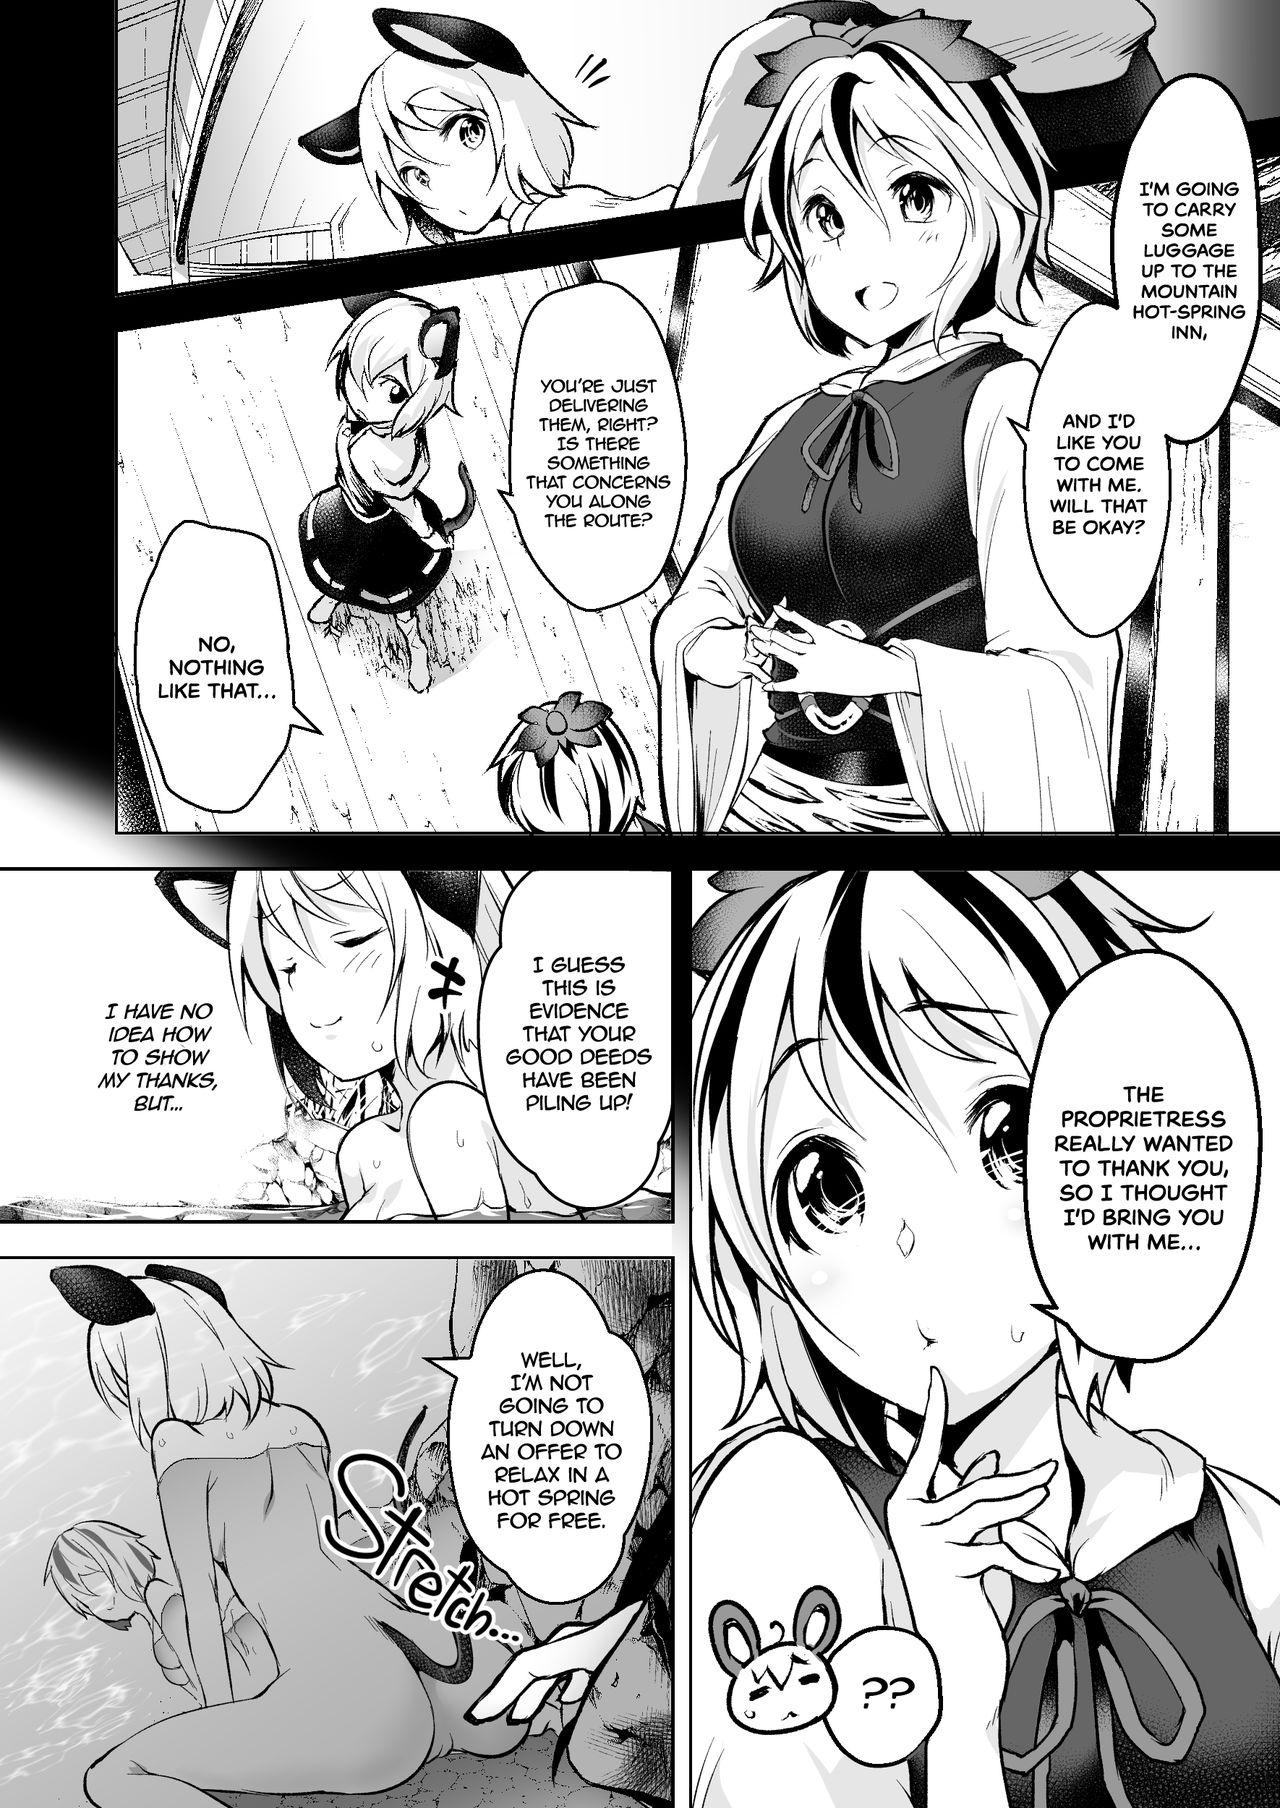 Swing Fucking with Portals - Touhou project Arab - Page 6